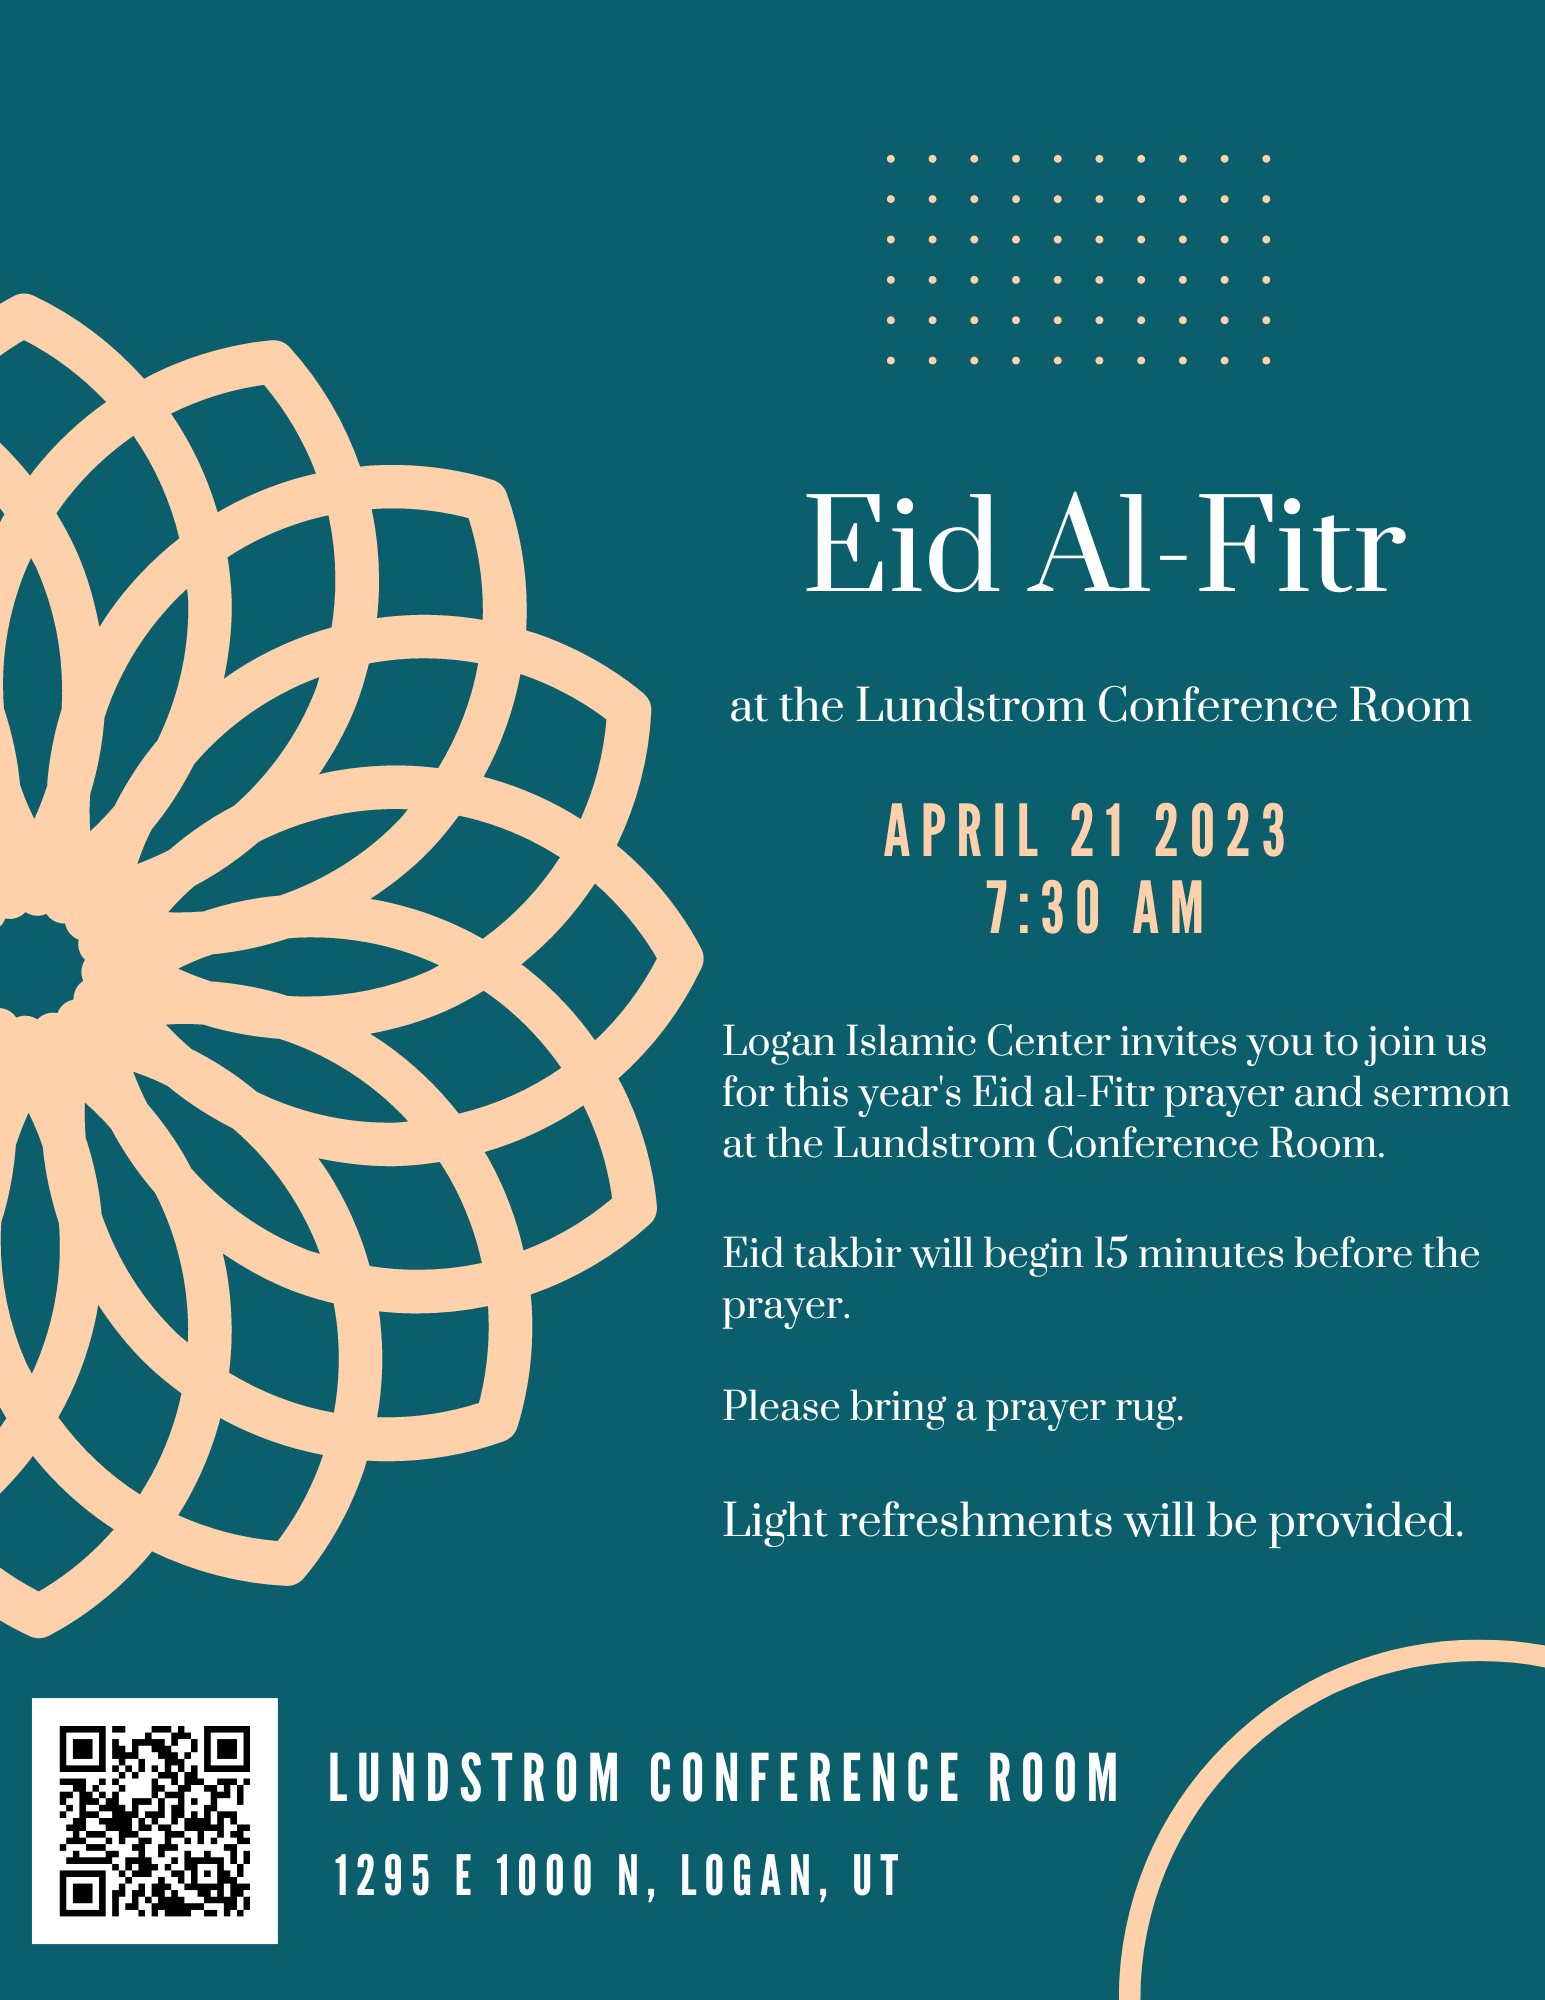 Eid Al-Fitr 2023 is on April 21st at 7:30 am at the Lundstrom Conference Room insha'Allah